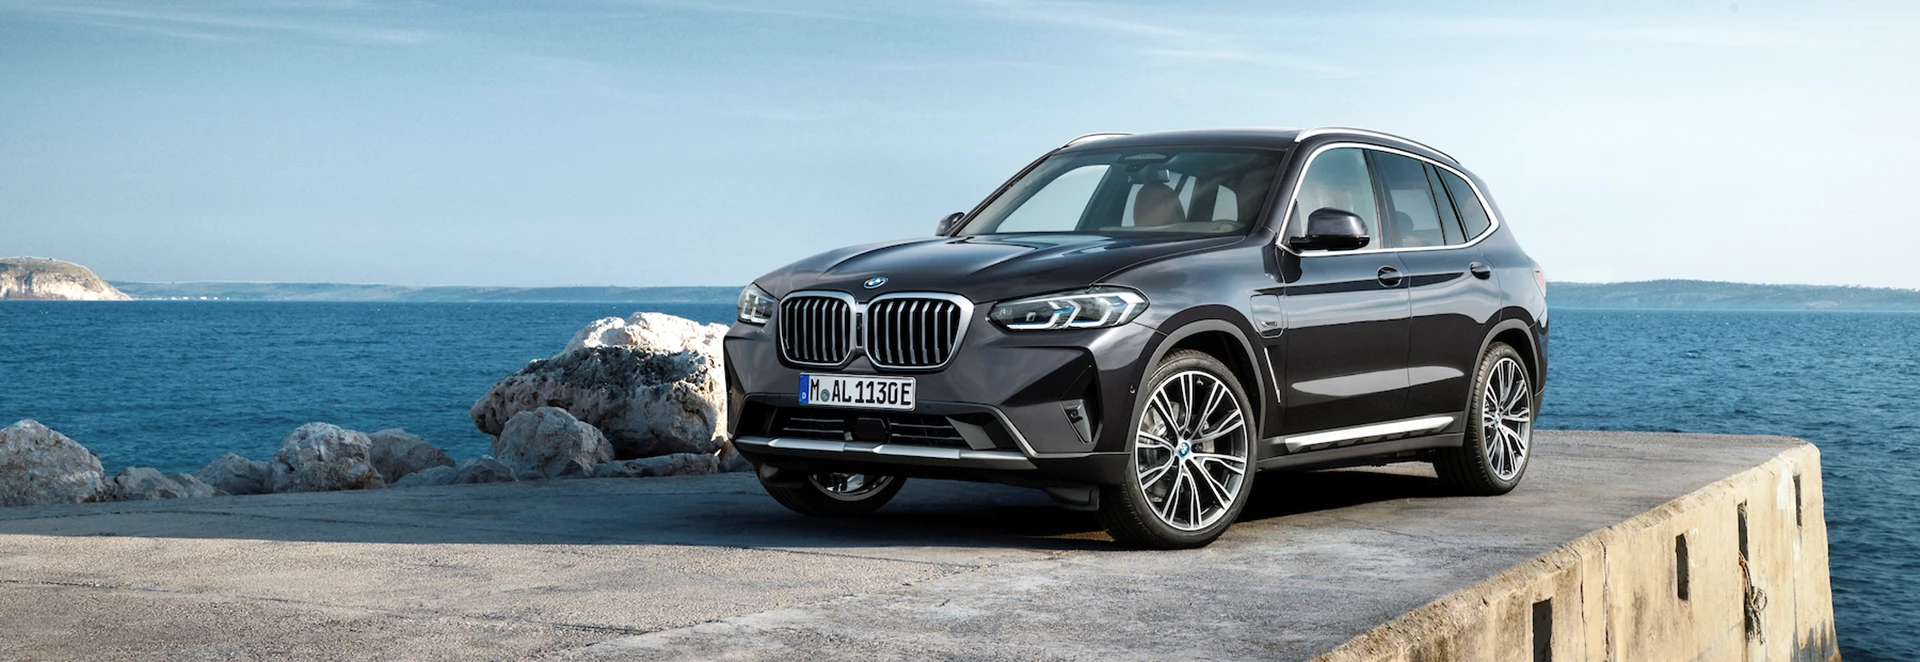 Facelifted 2021 BMW X3 and X4 SUVs revealed 